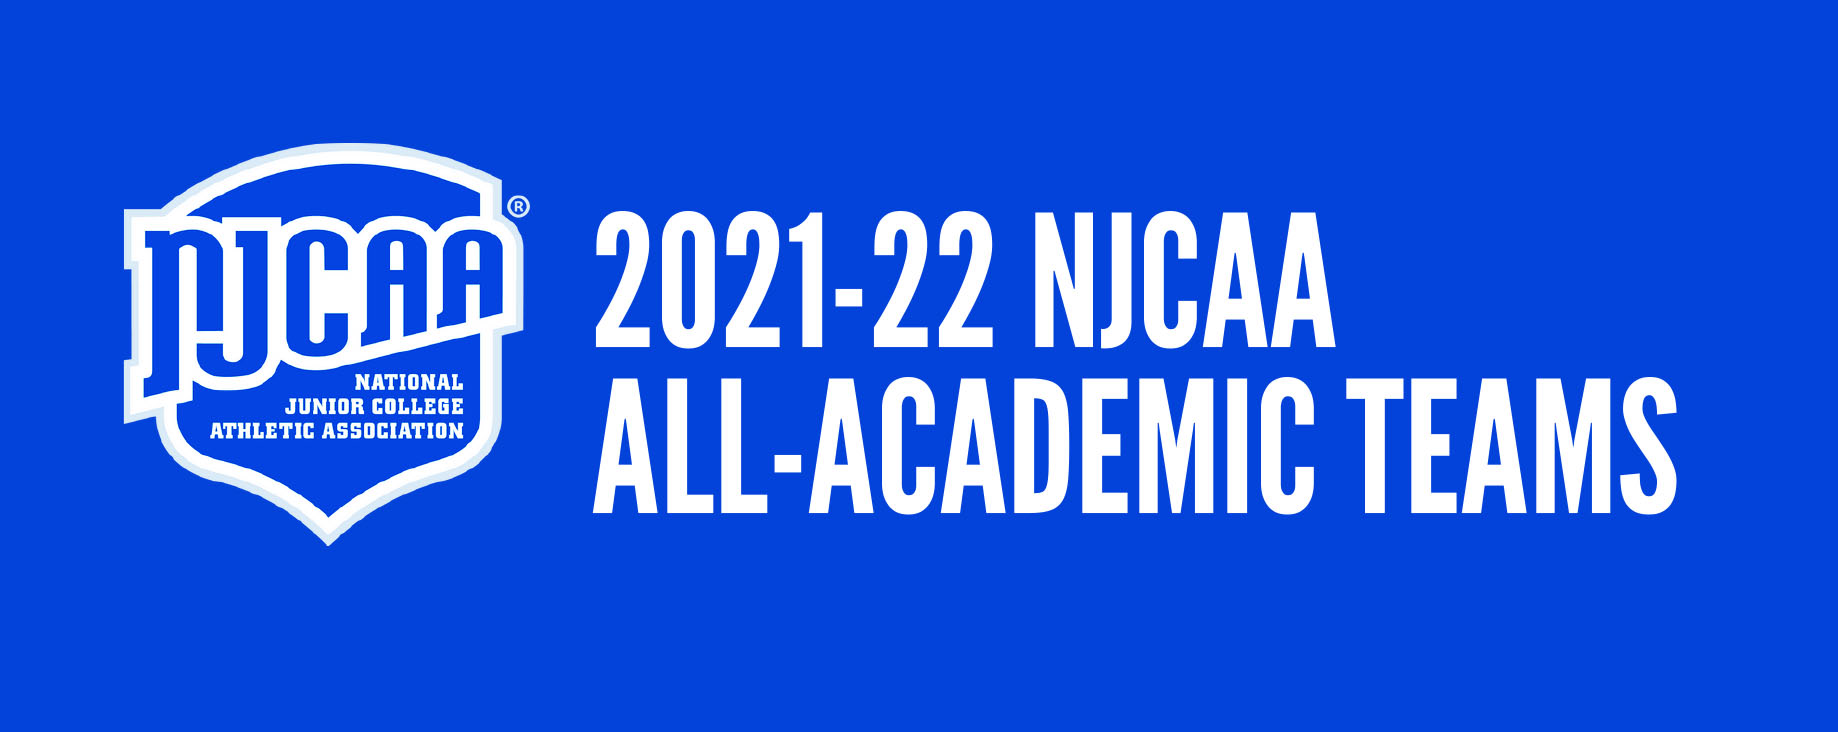 Nine FGC Timberwolves named to NJCAA All-Academic Teams